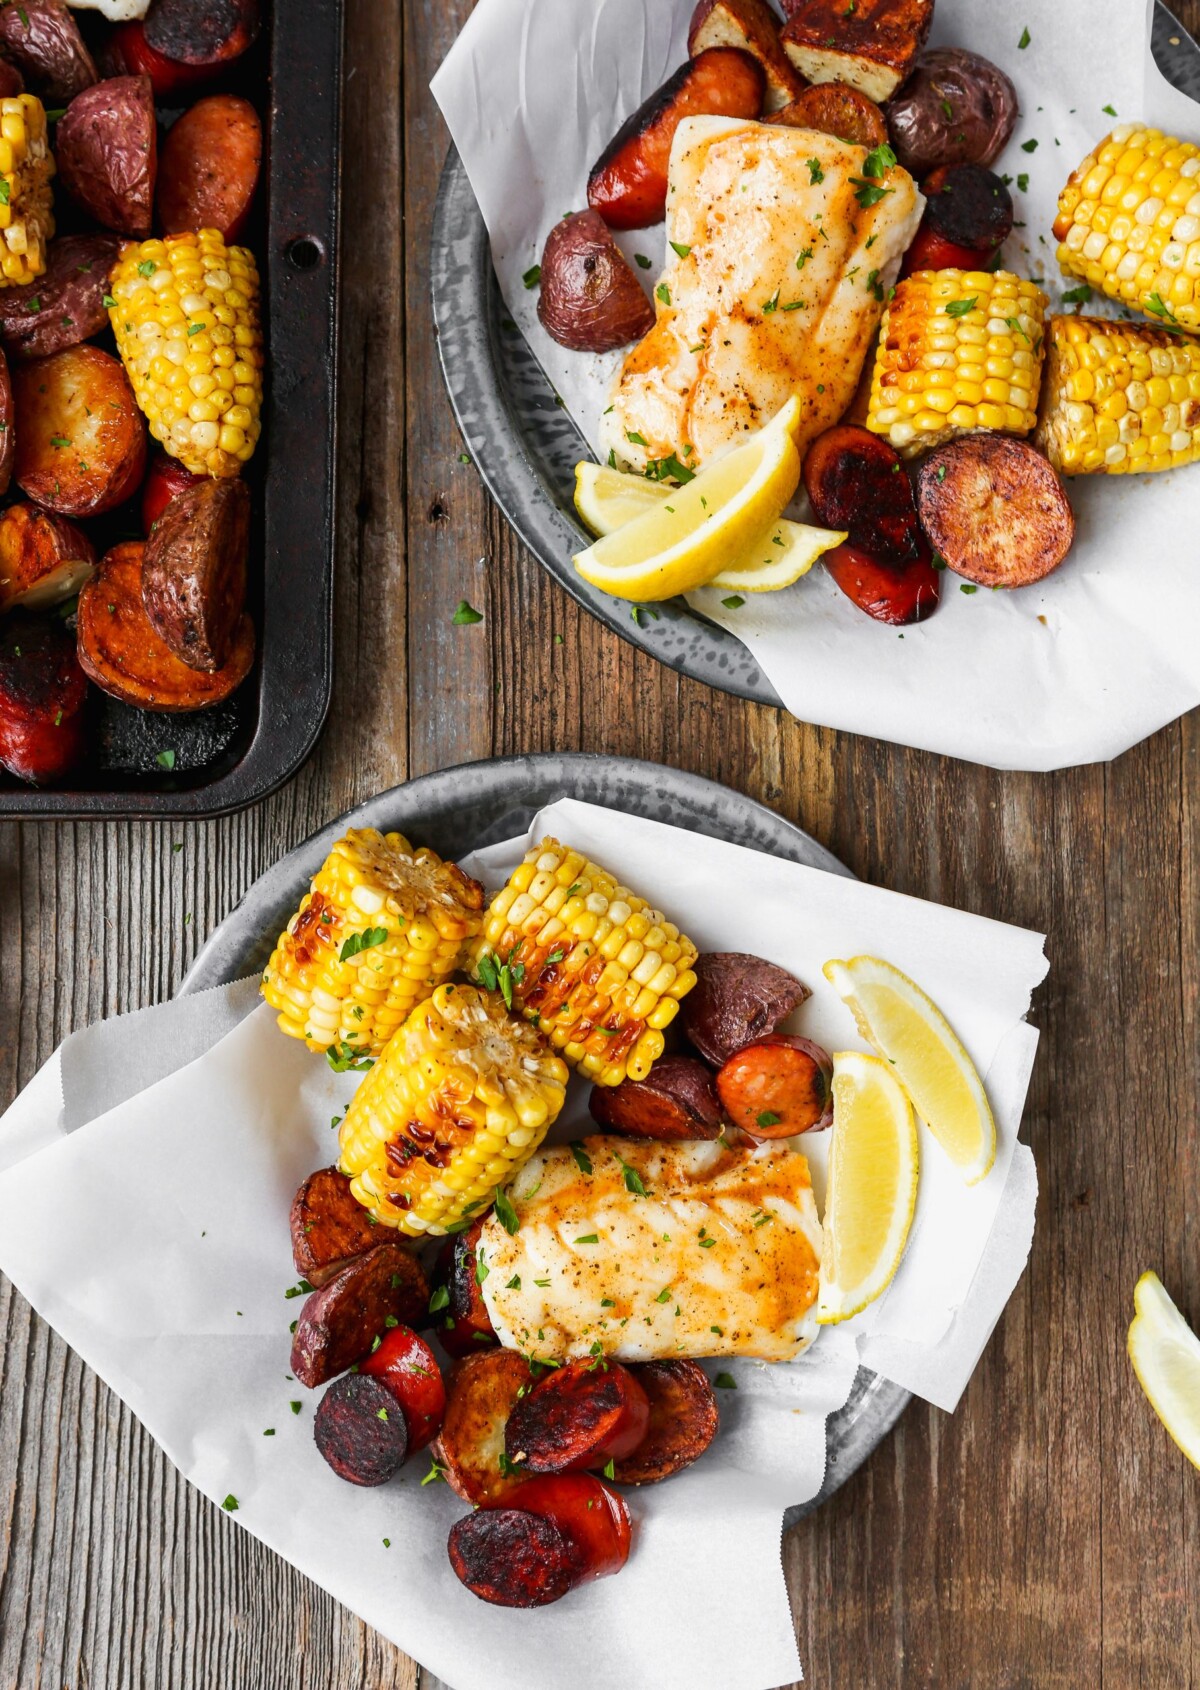 Roasted fish, potatoes, sausage, and corn on paper-lined metal plates set on worn wood surface.